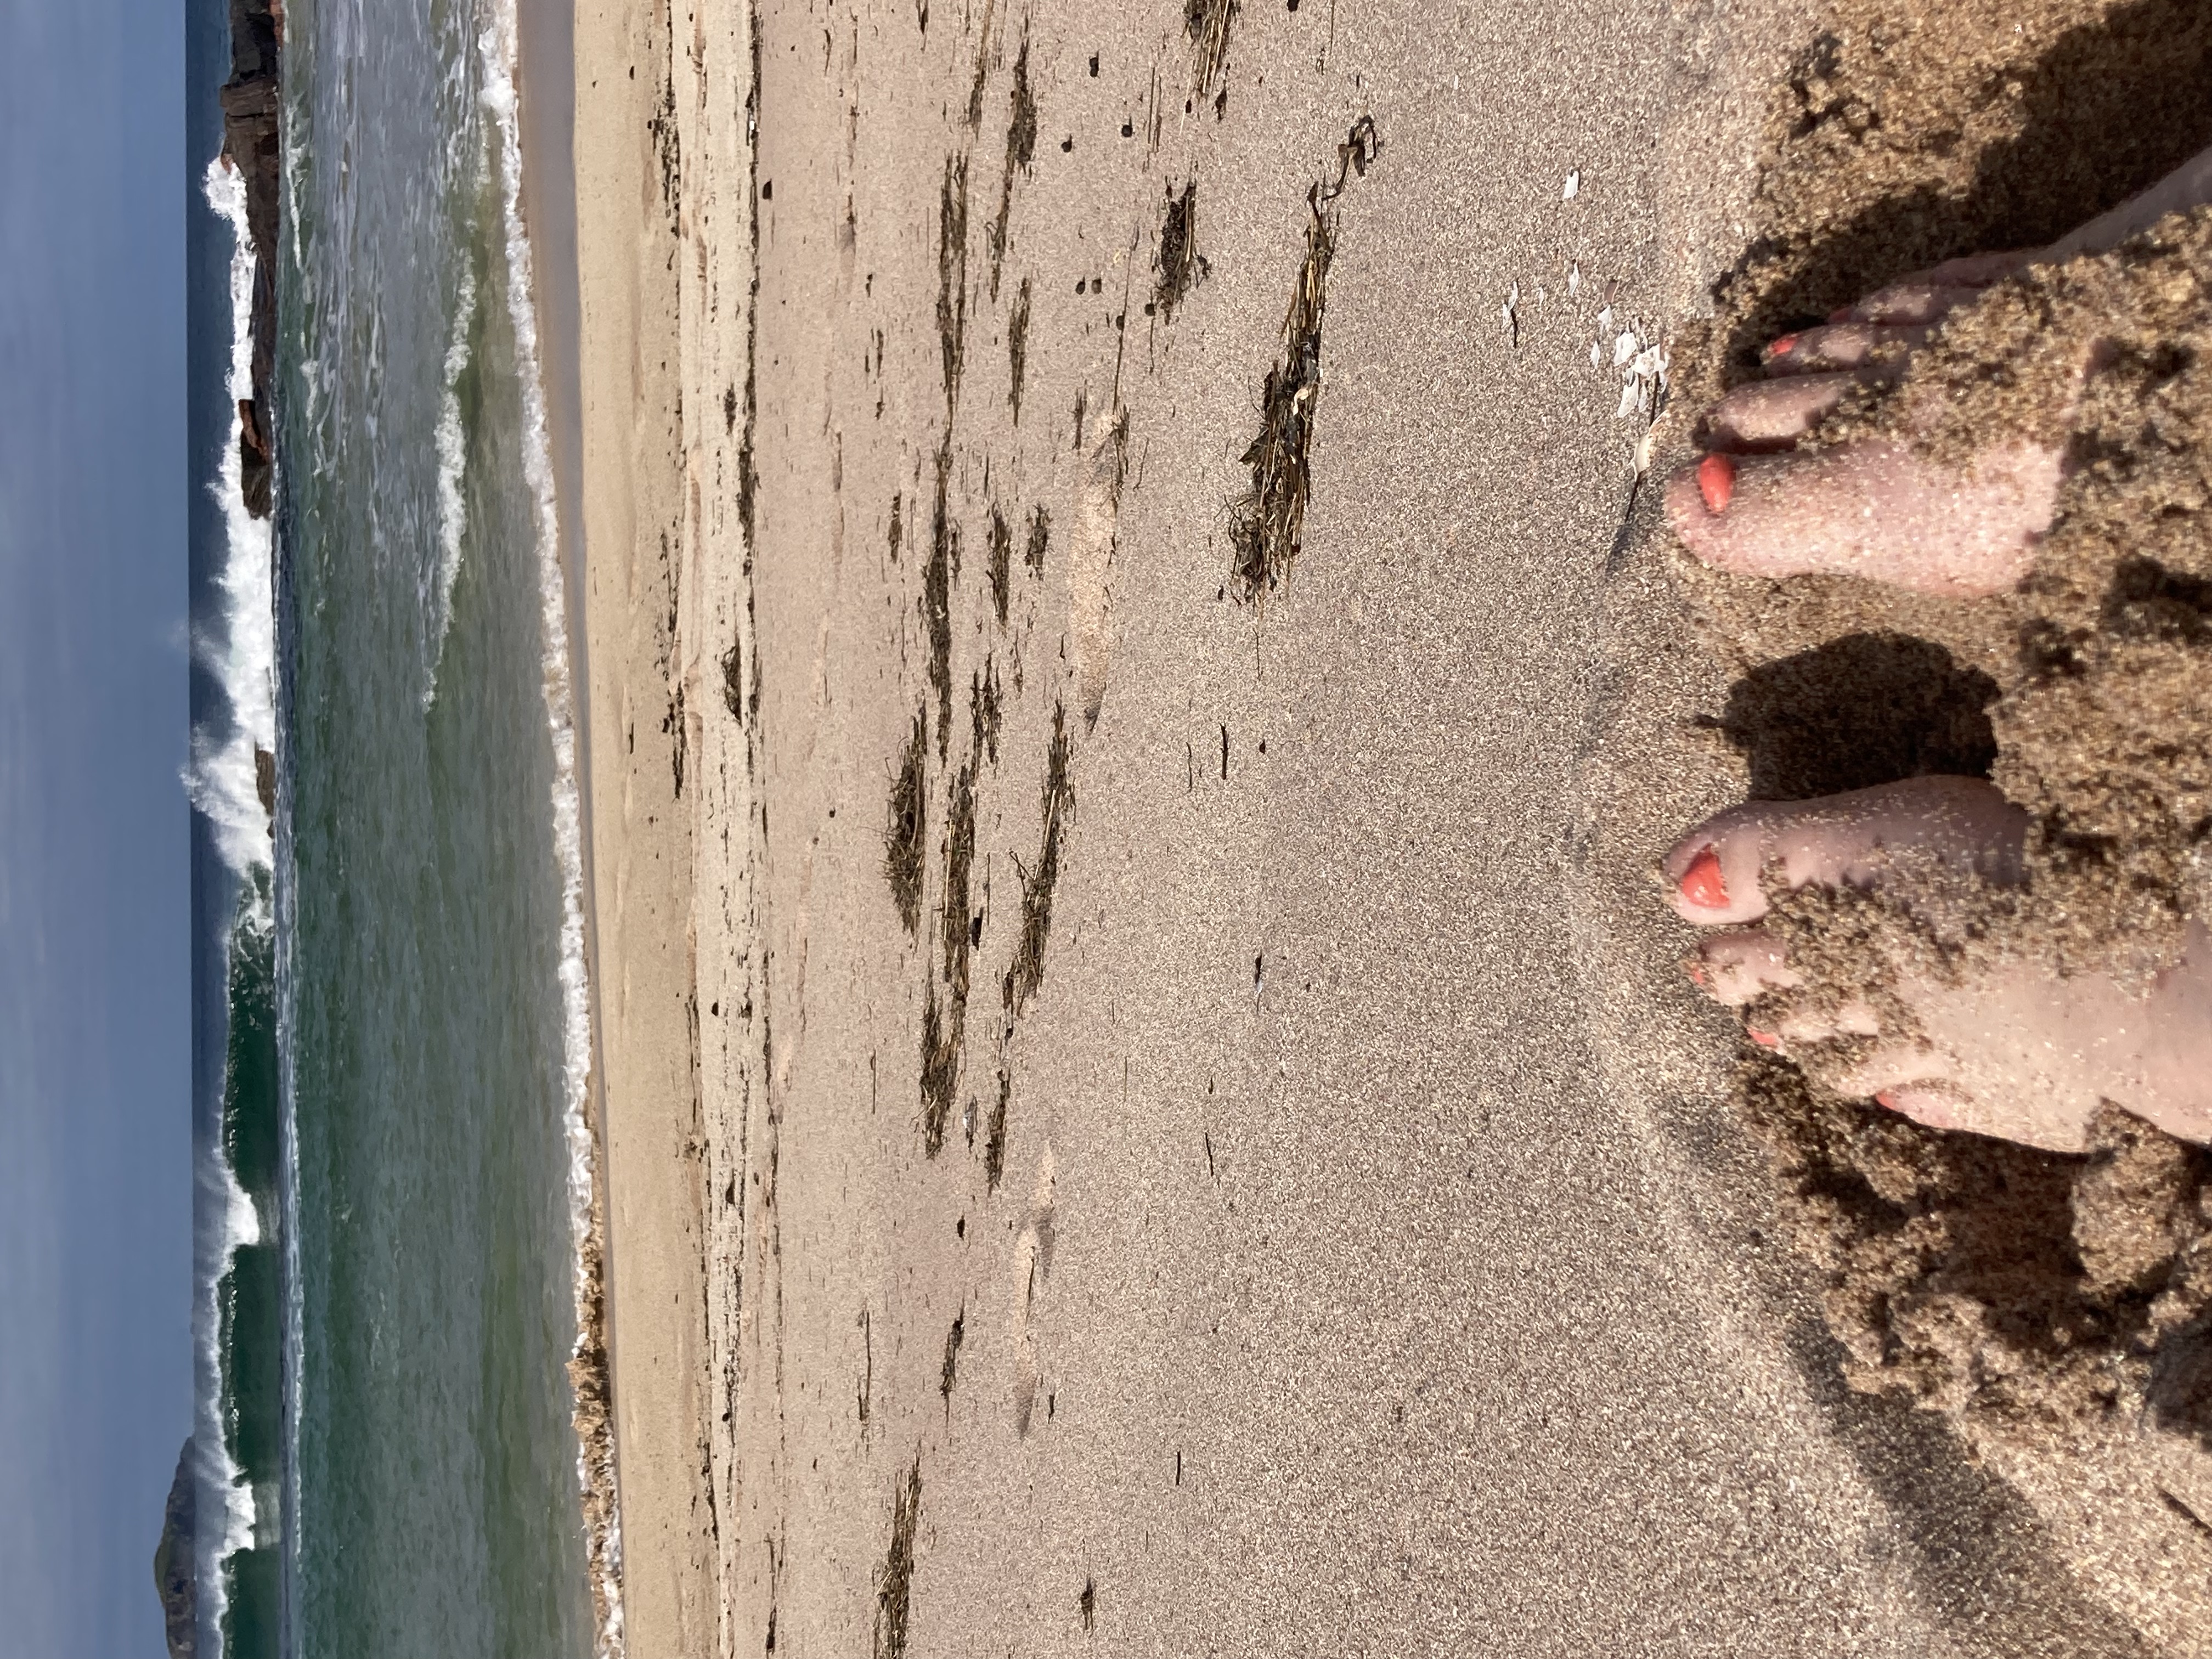 A view of my feet in the sand with the waves in the background